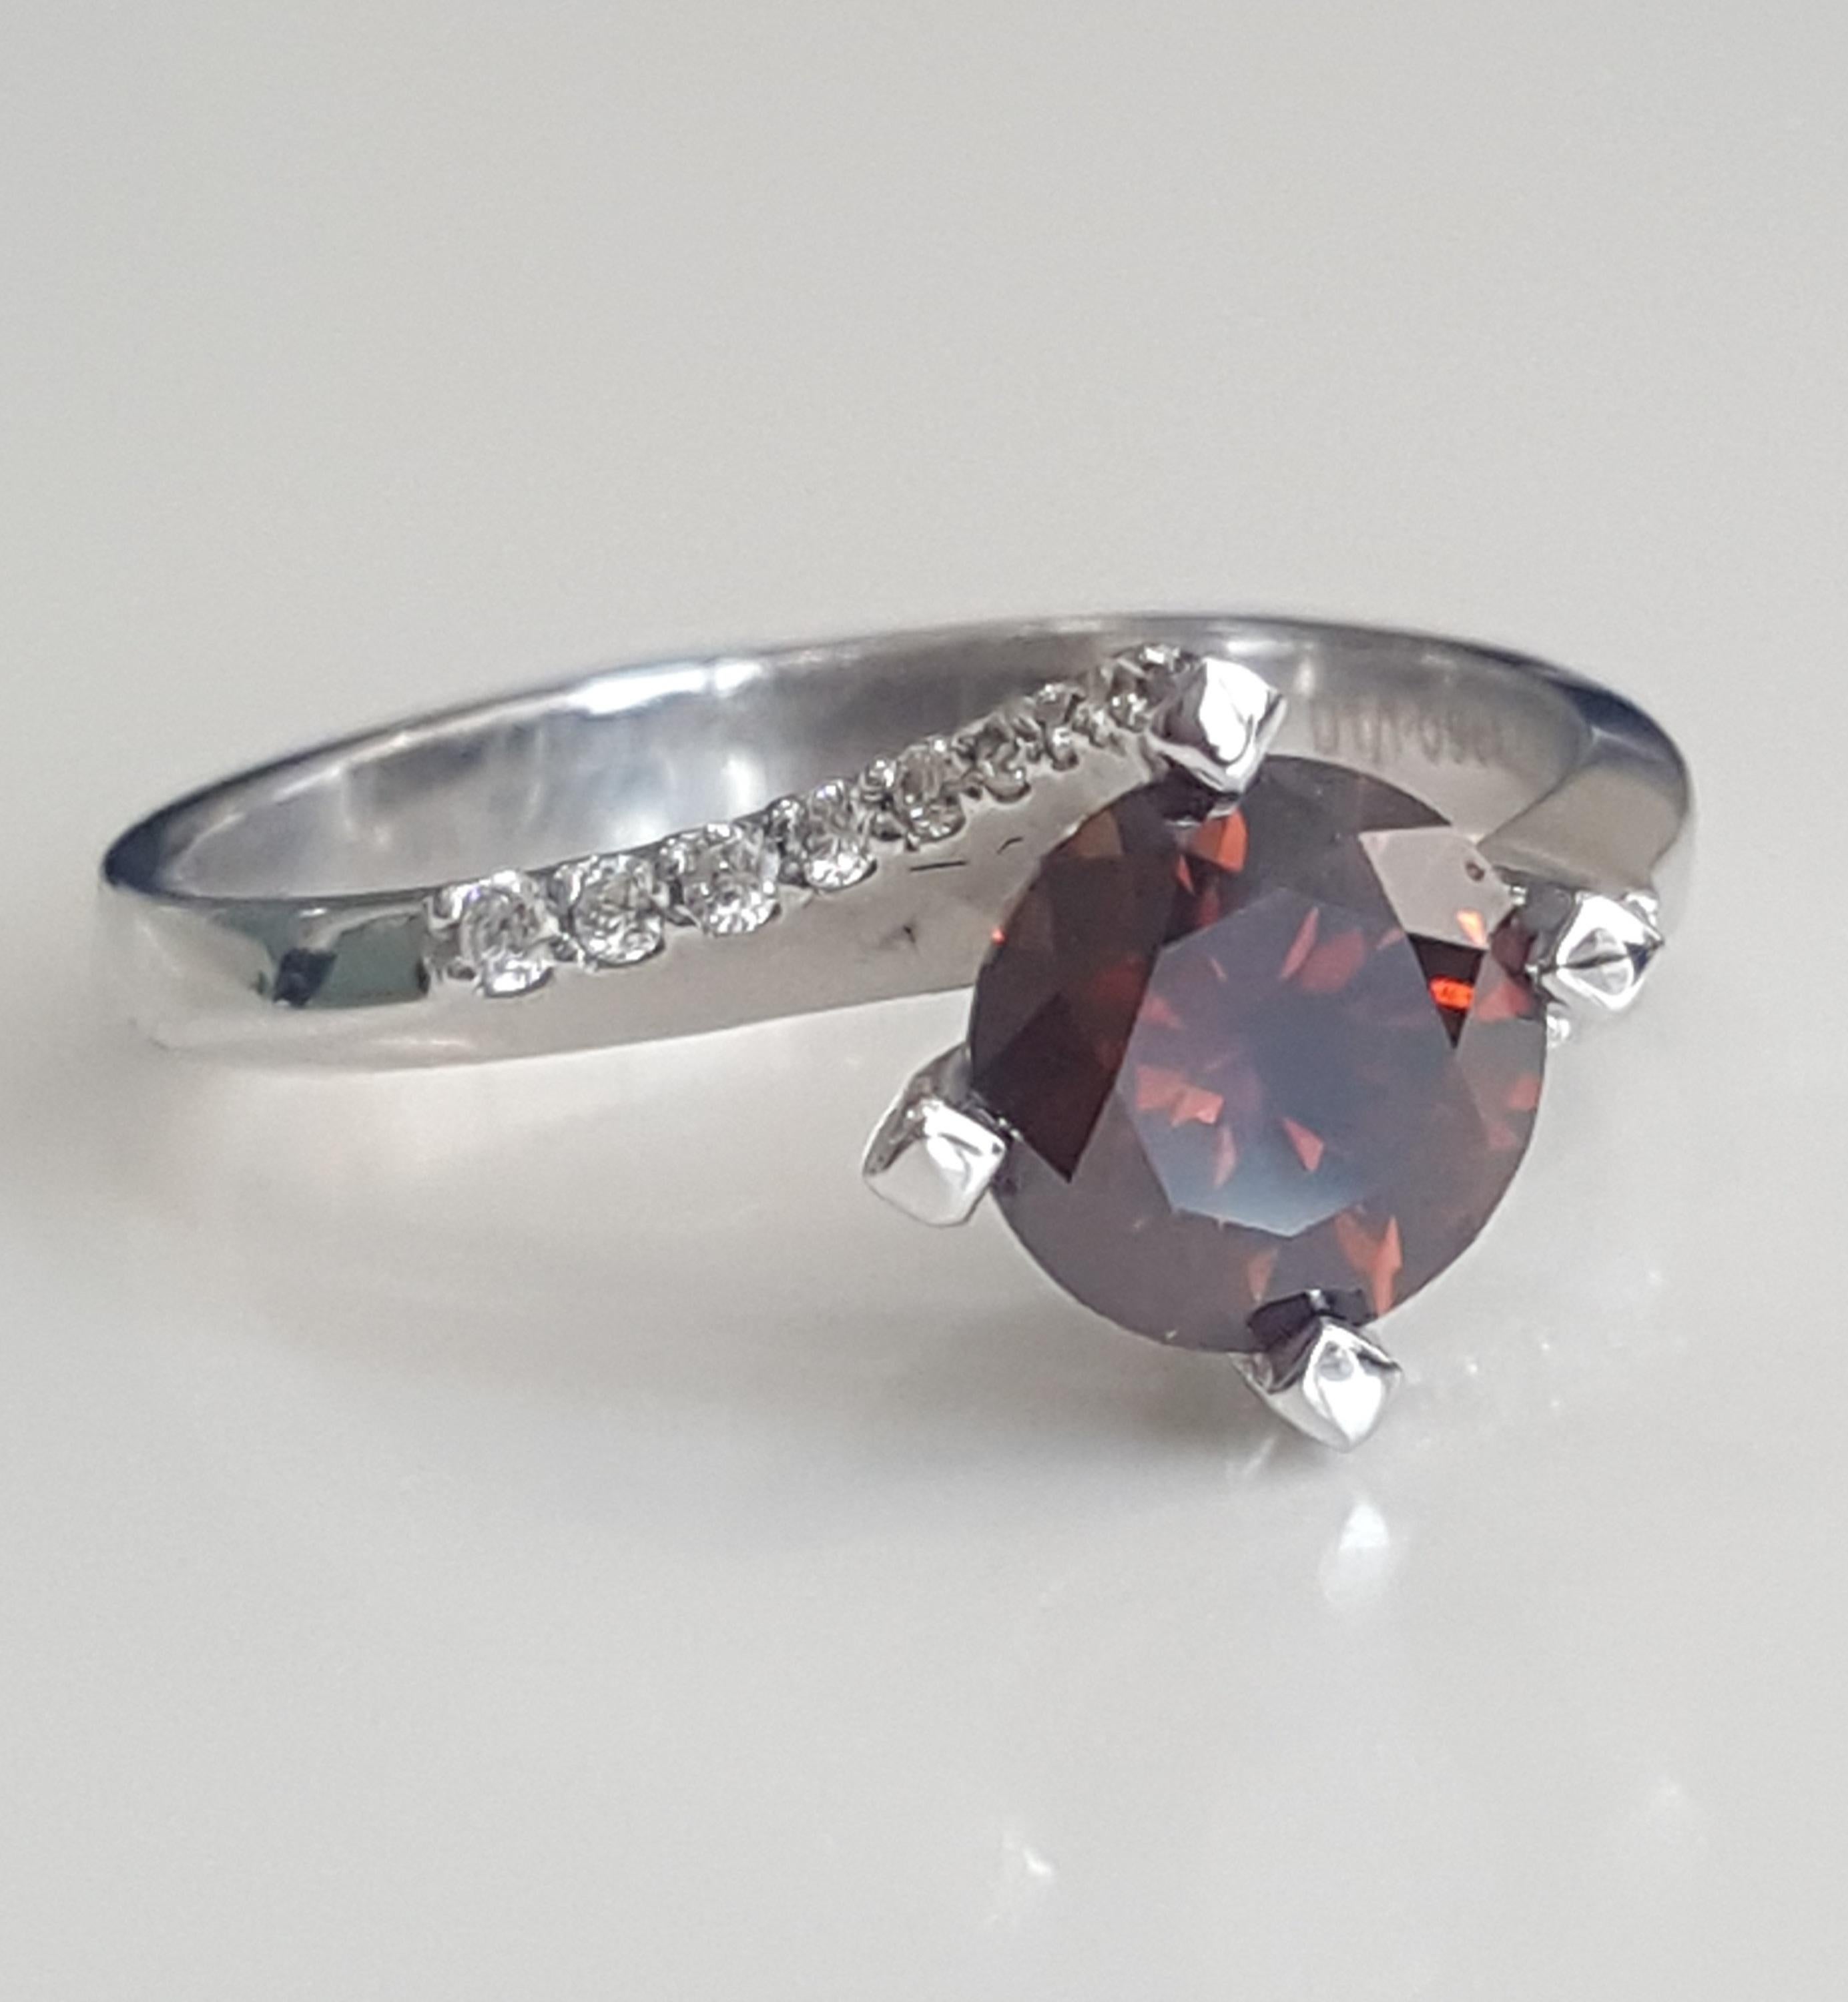 This crisp, elegant and polished ring is elegantly designed and custom made by Moguldiam Inc in 18 k white gold. Centering a GIA certified natural fancy dark orange brown weighing 1.09 carat with VS1 clarity and white small round brilliant diamonds